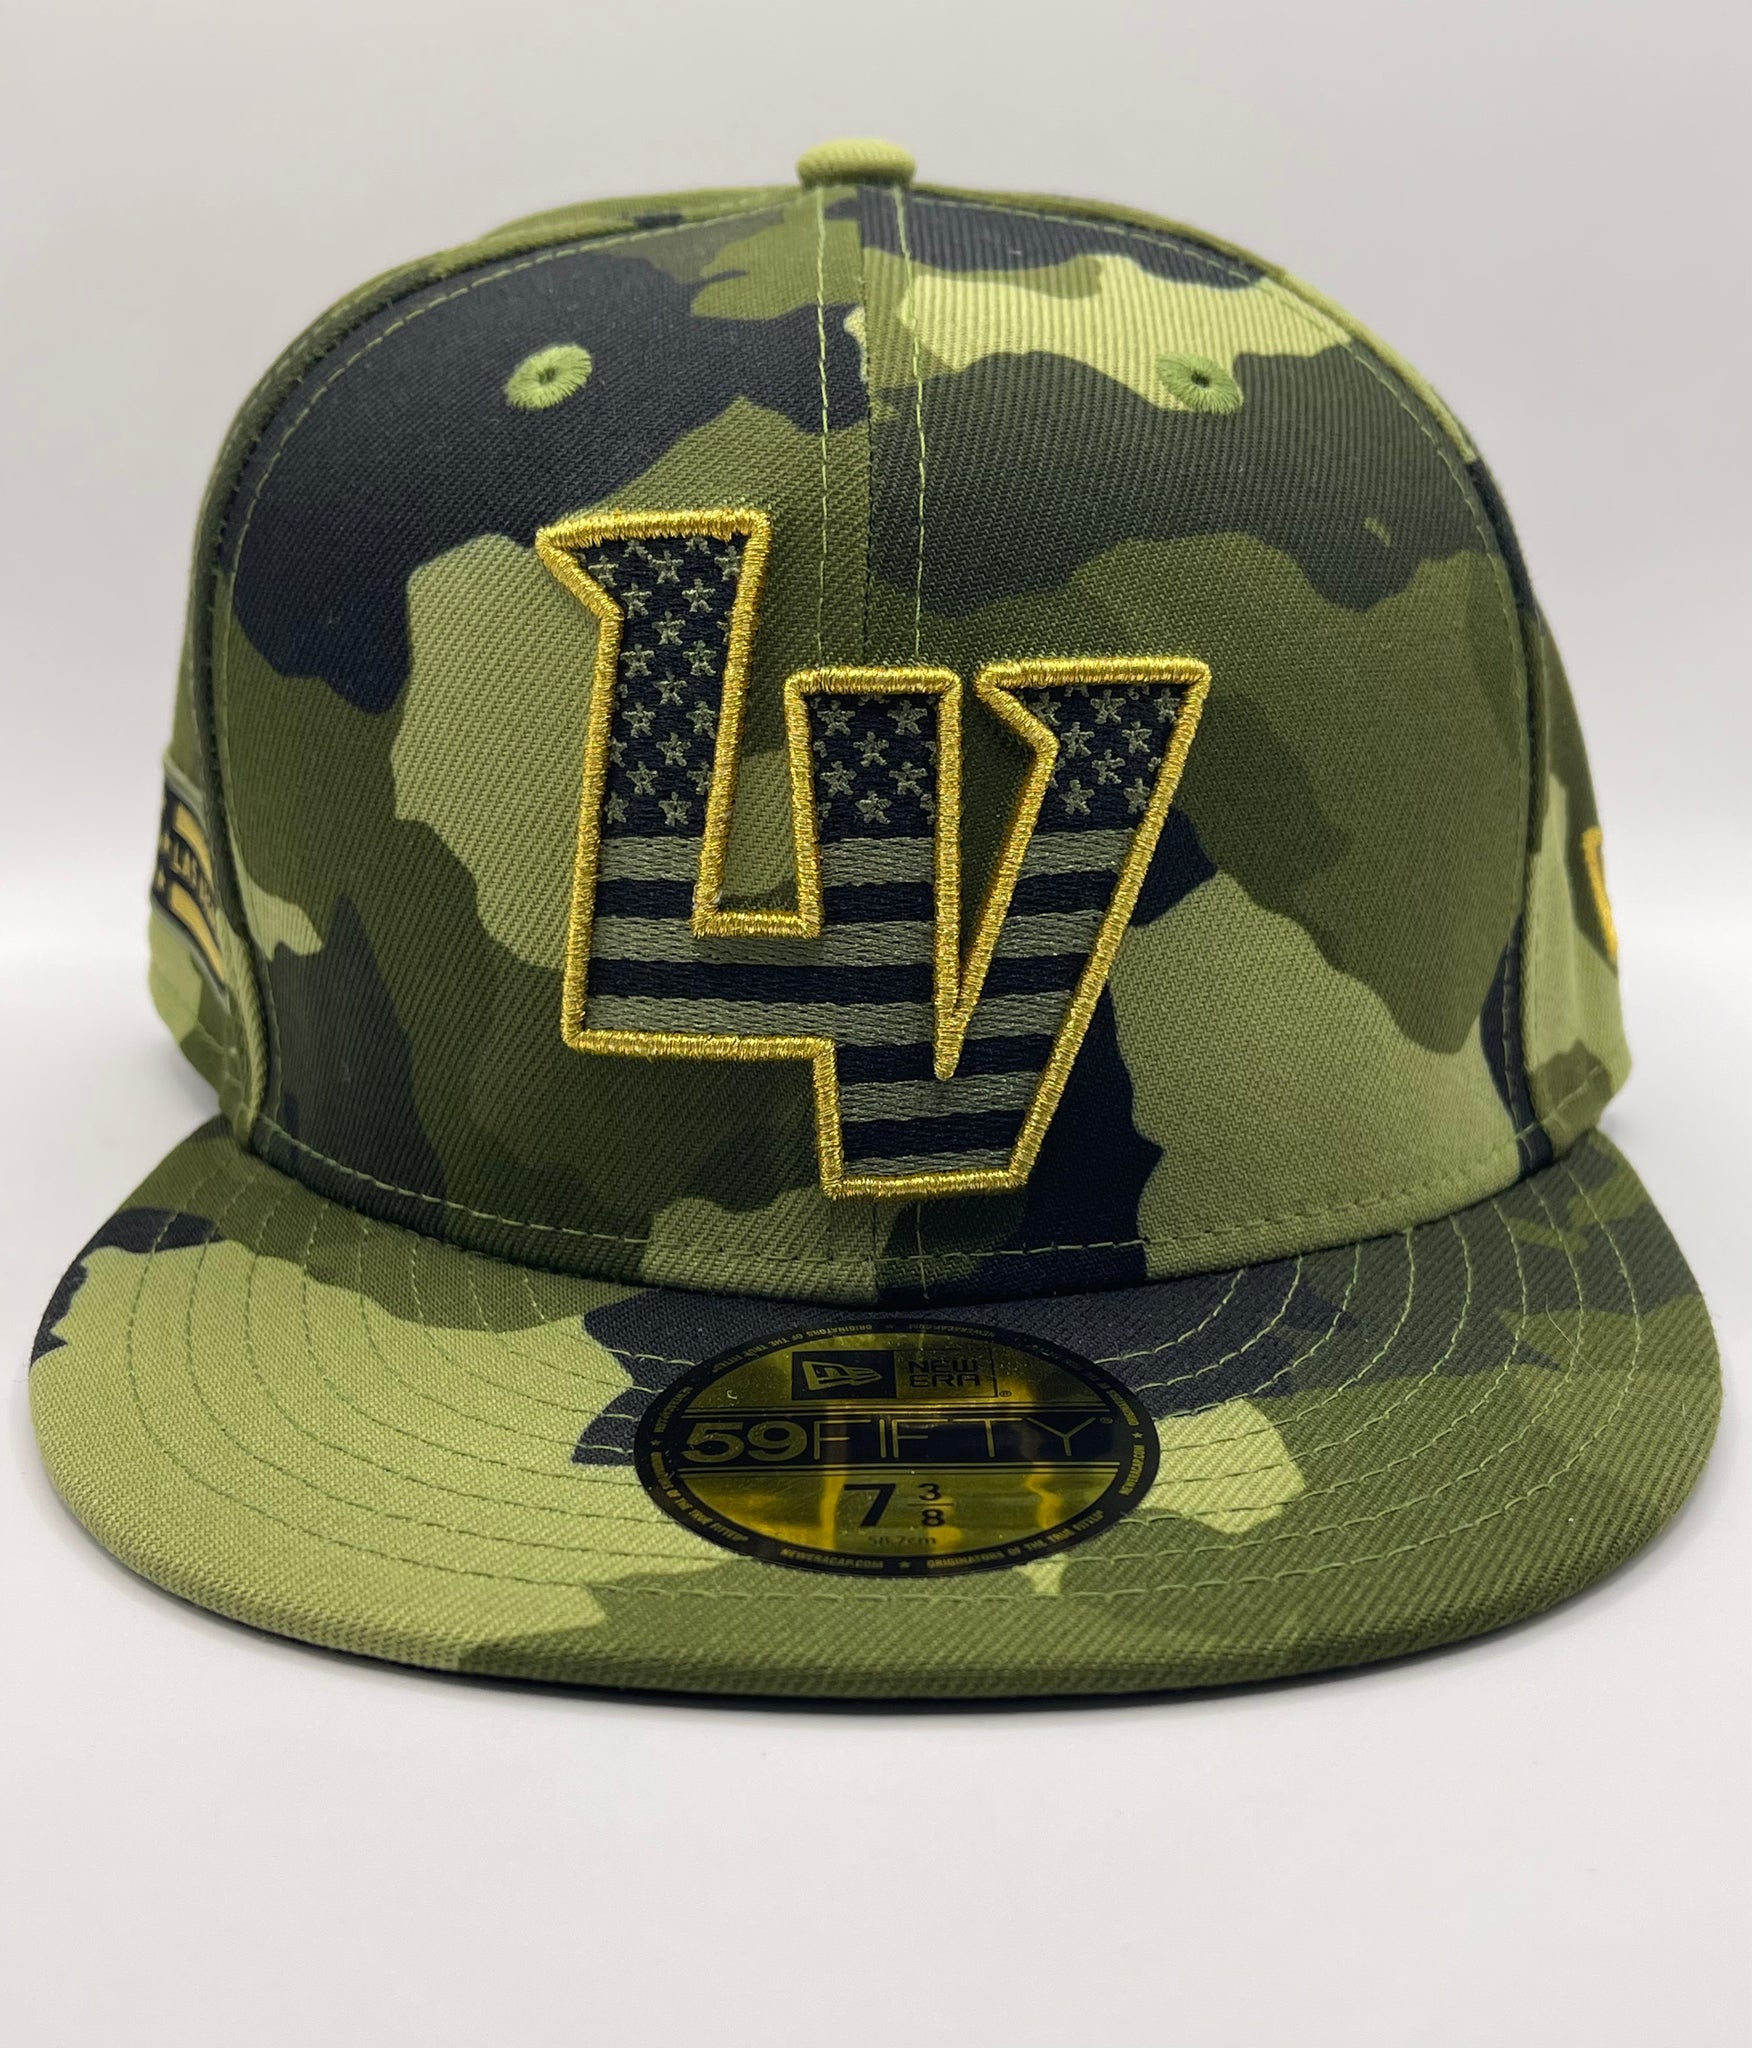 Las Vegas Aviators Armed Forces Day New Era 59FIFTY Fitted Hat - Green Camo